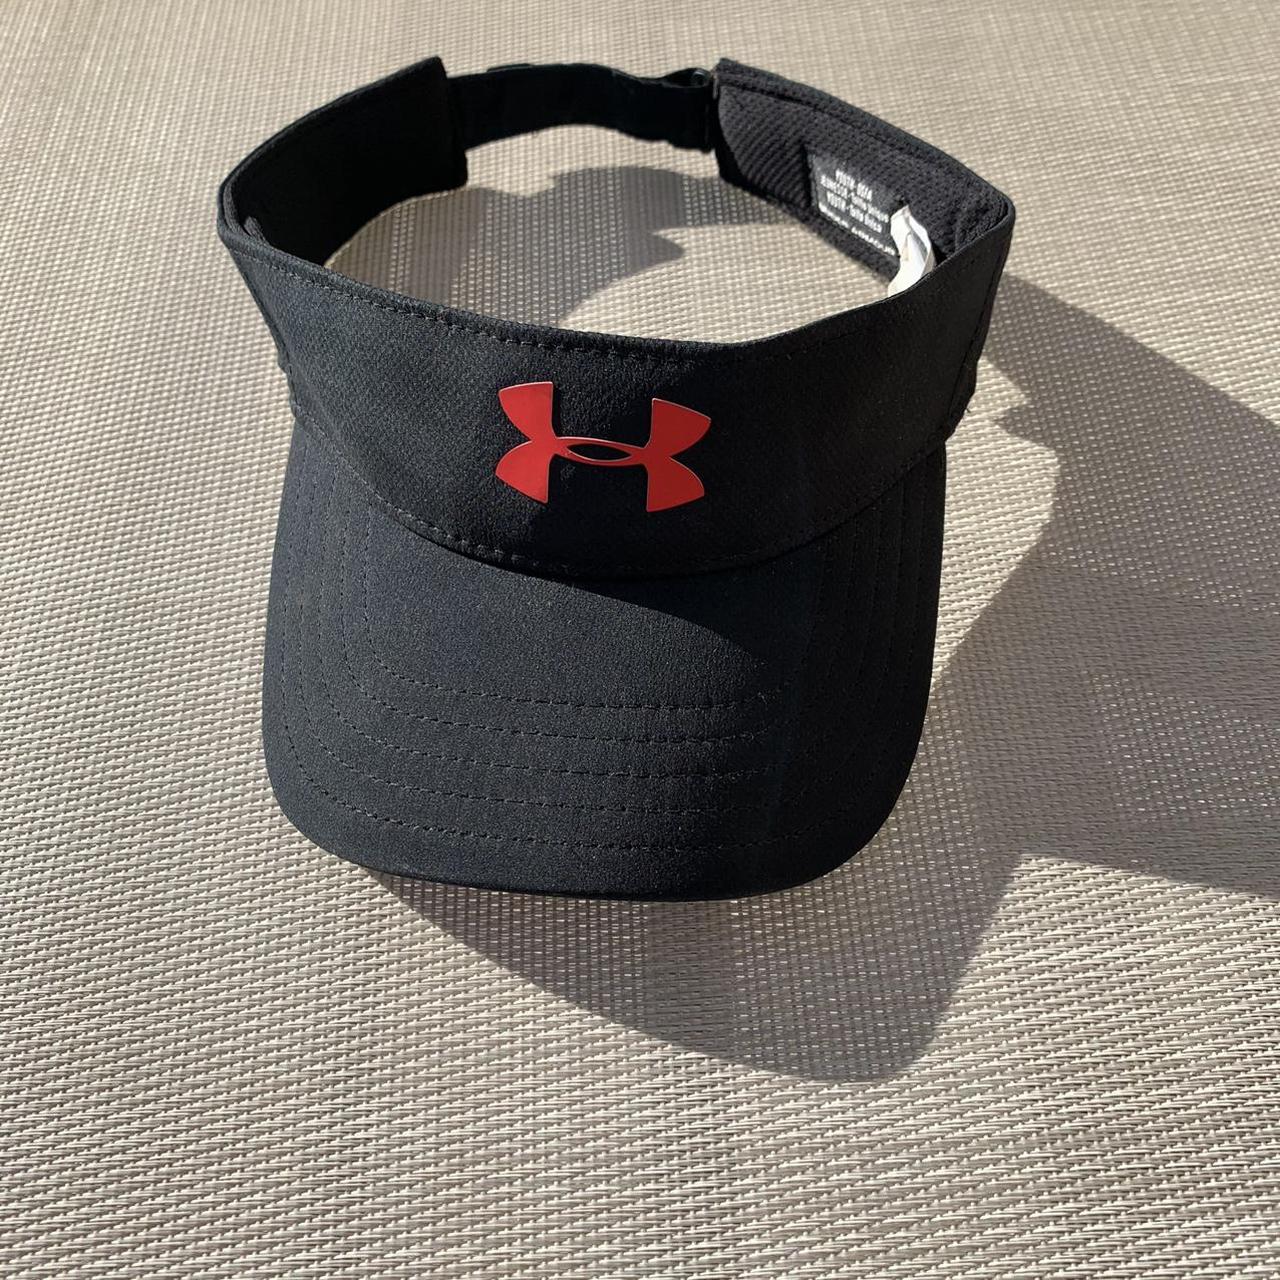 Black and Red Under Armour Youth Visor #black #red - Depop